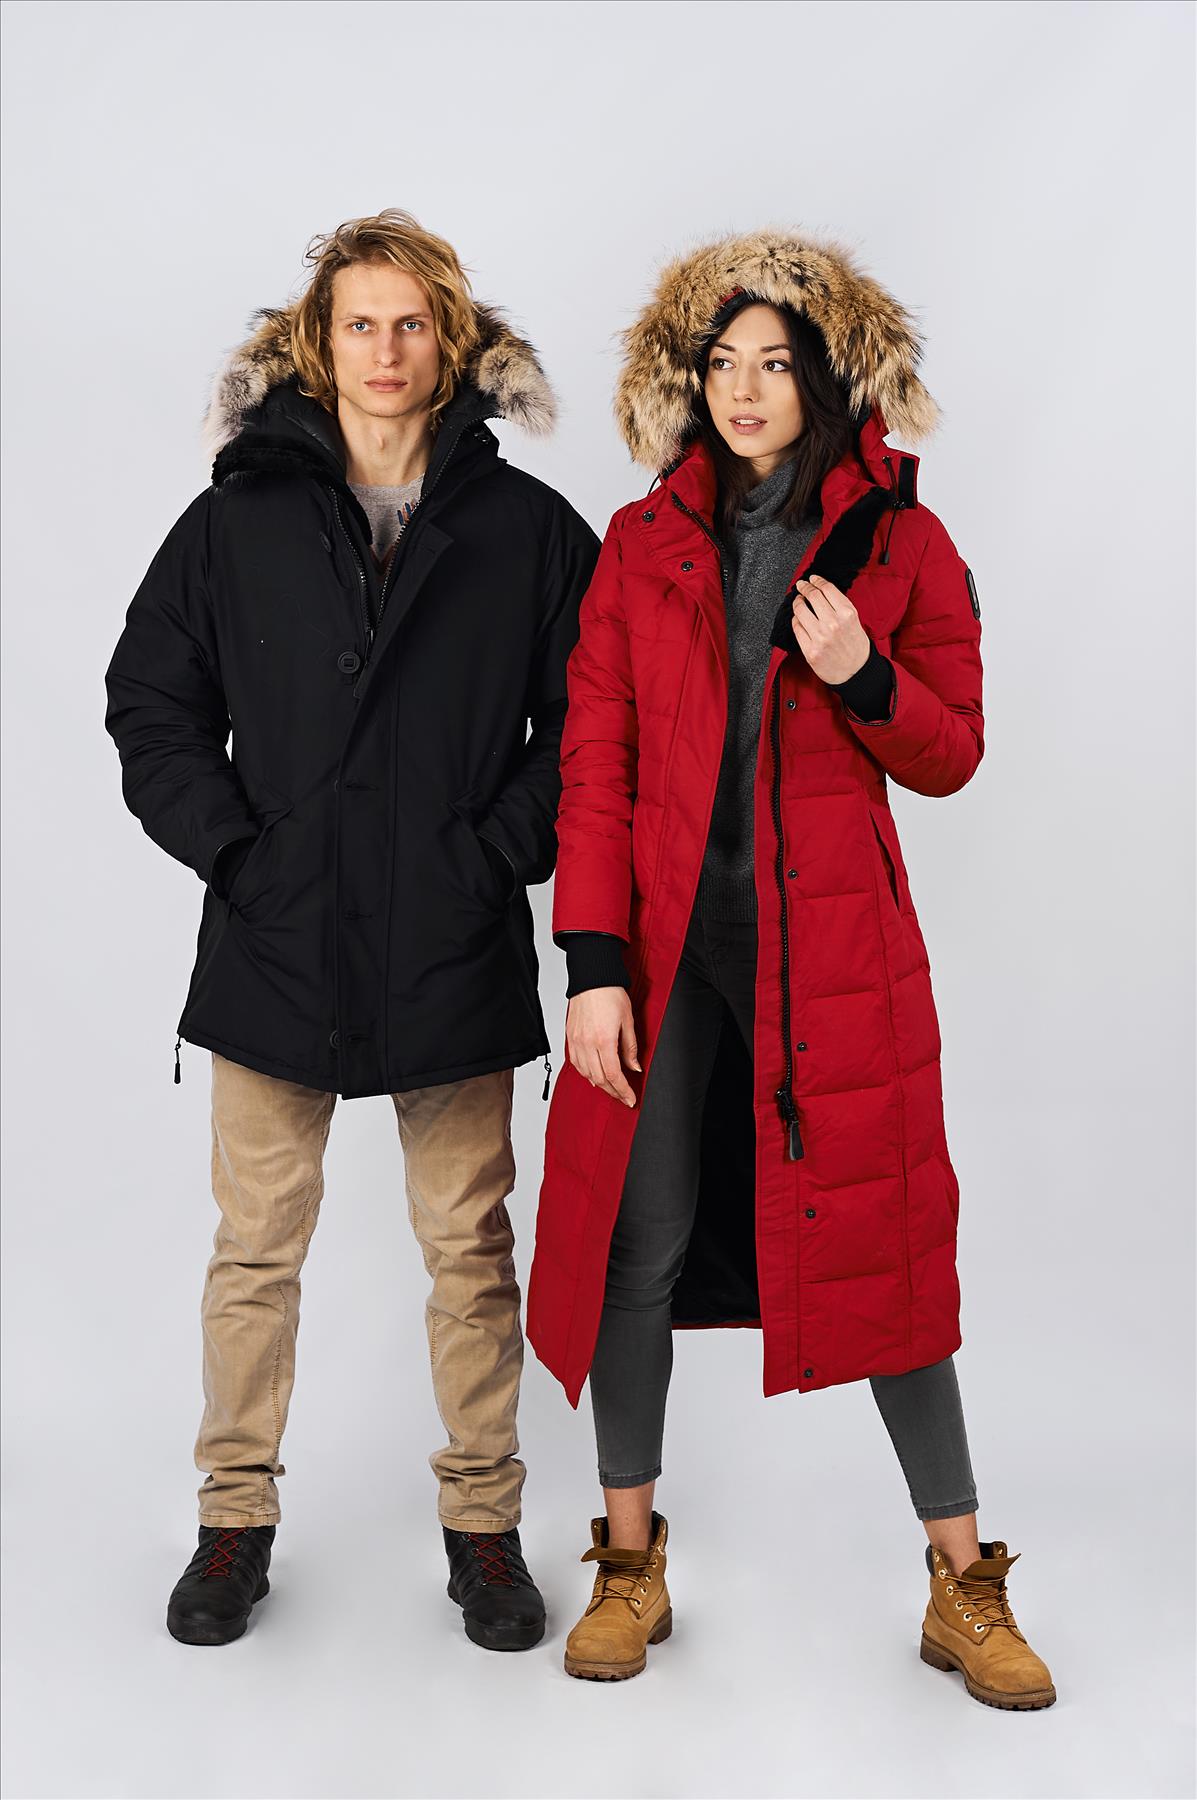 Arctic Bay Winter Parkas: How to Choose the Best Fit for You